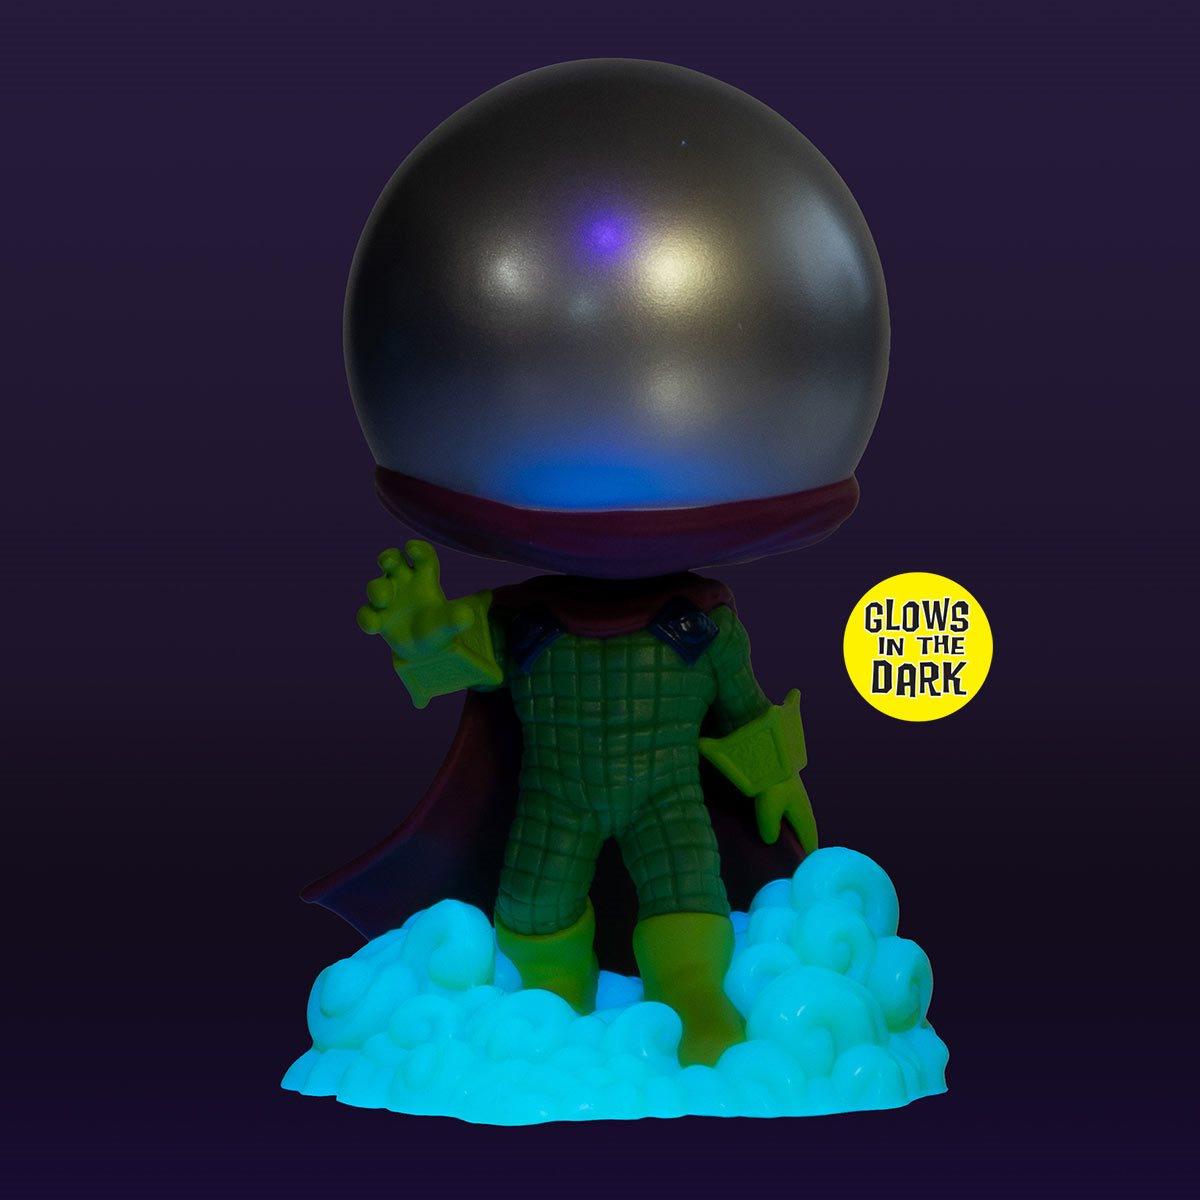 Funko Pop! Marvel - Mysterio Glow-in-the-Dark - BumbleToys - 18+, Action Figures, Avengers, Boys, Characters, Funko, Marvel, Pre-Order